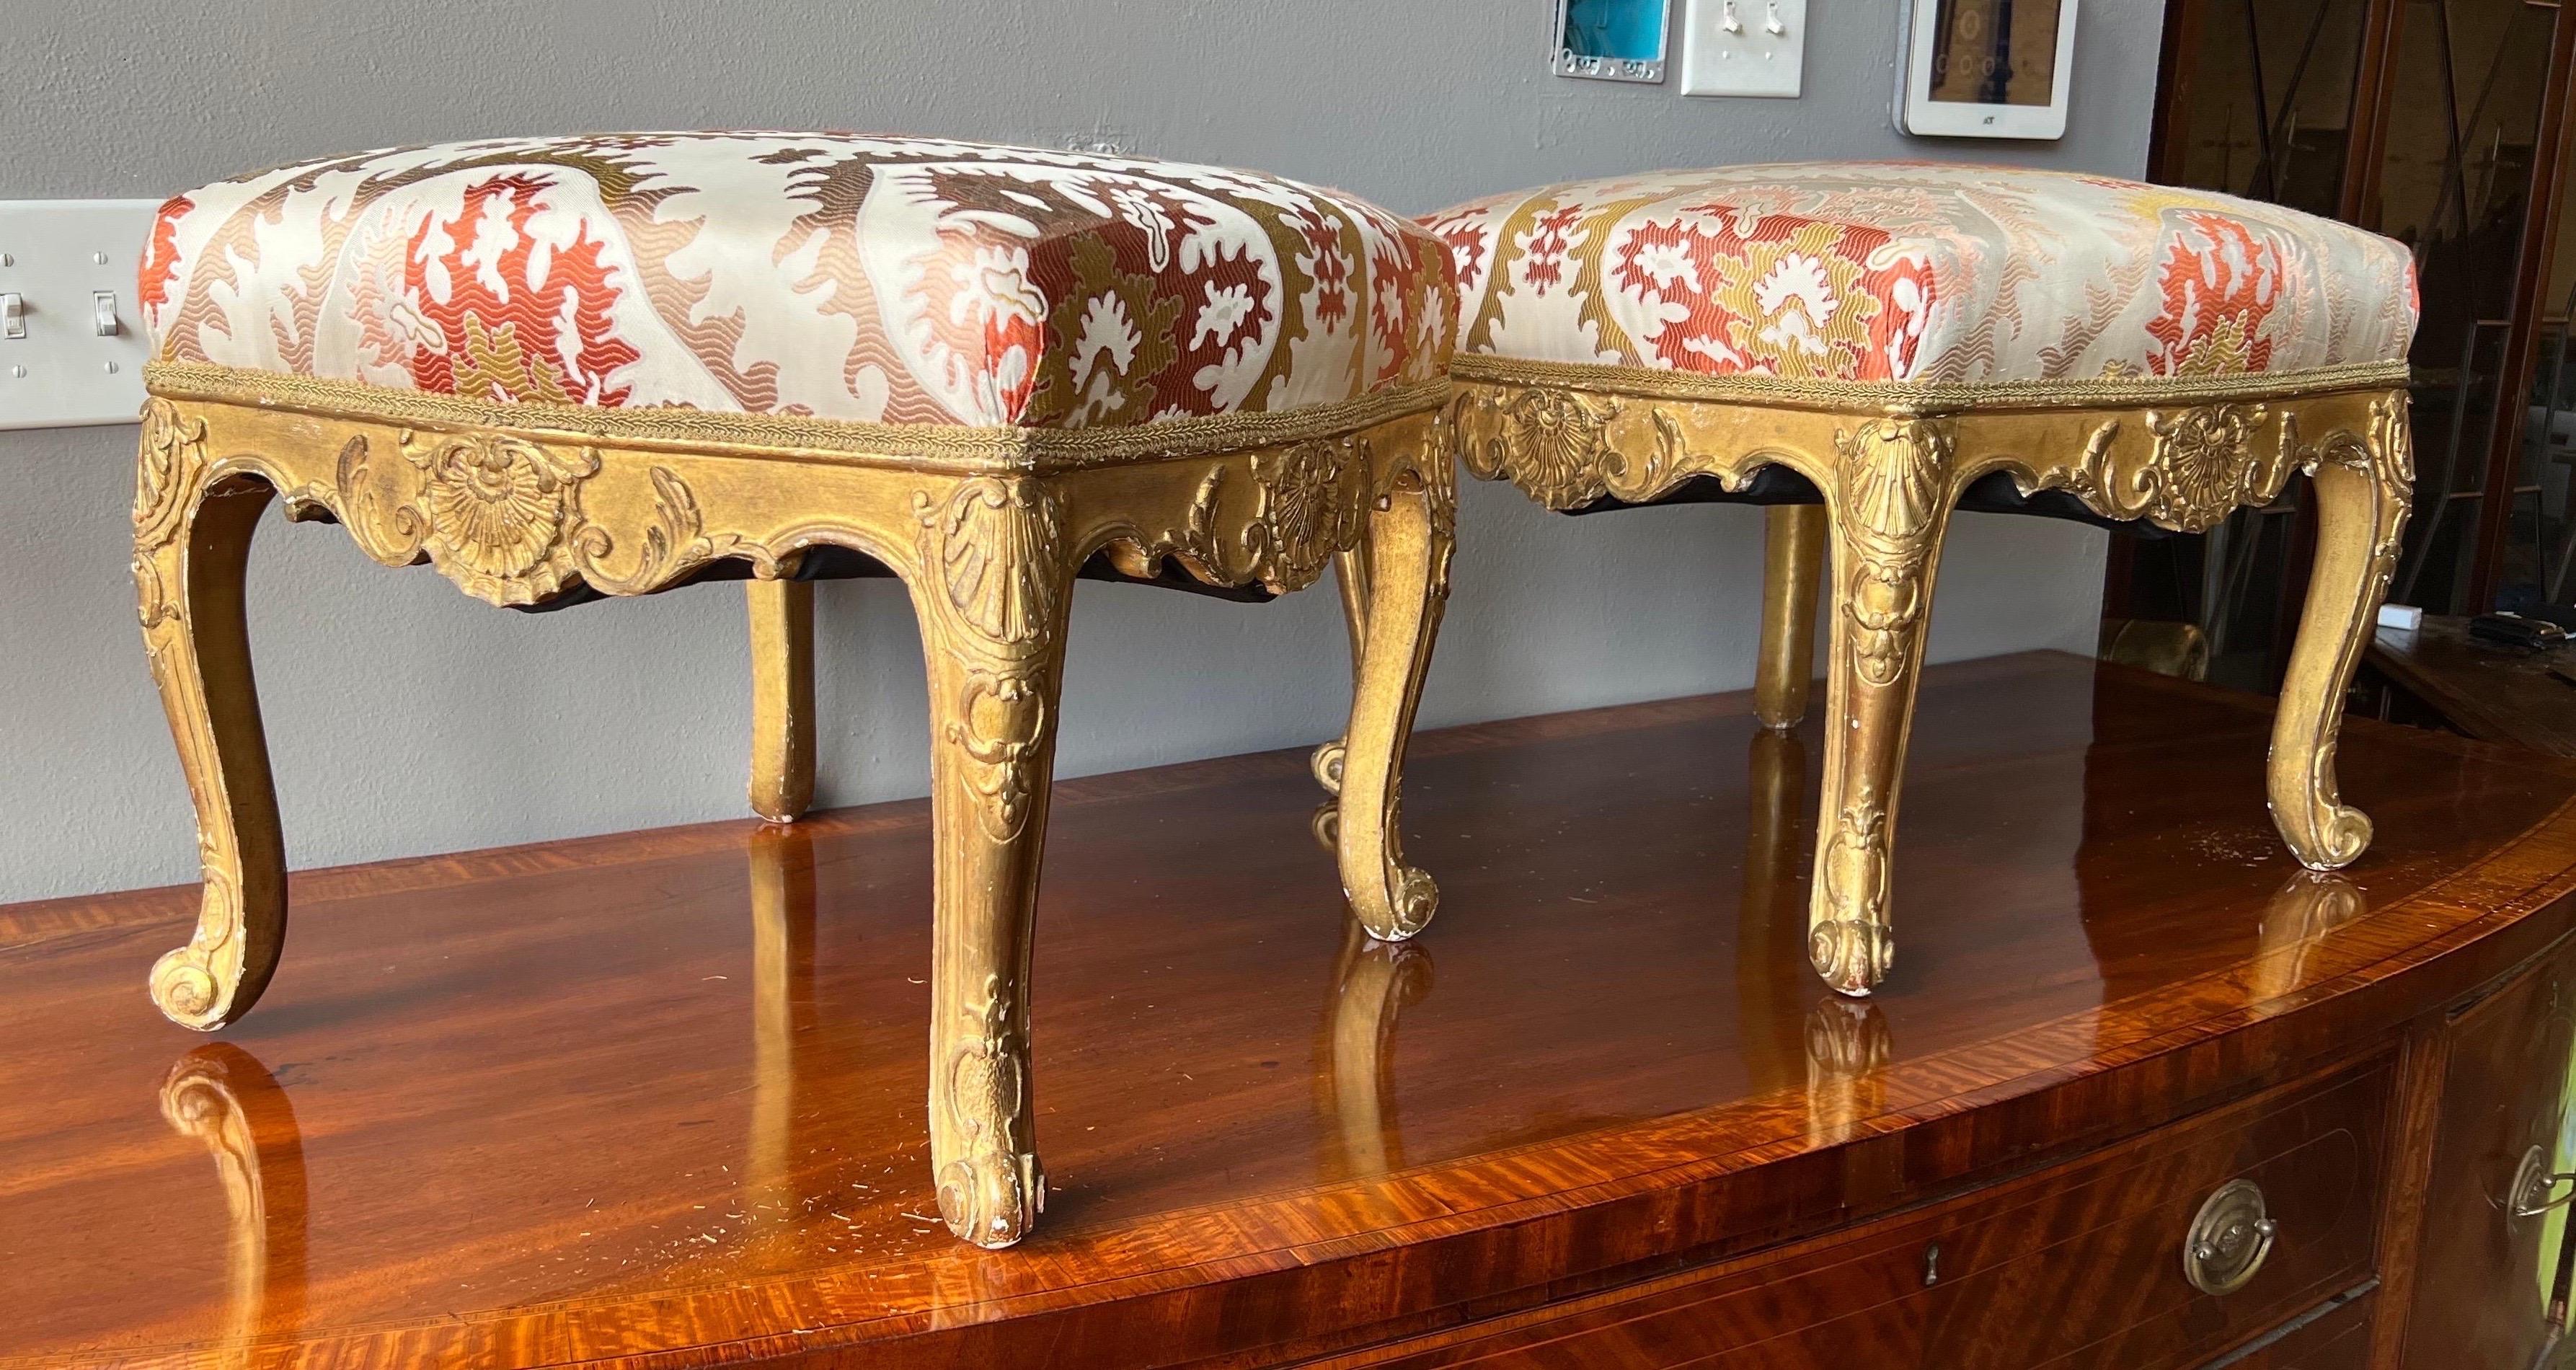 Fantastic pair of 18th-19th century French gold gilt wood stools in attractive upholstery from an estate in the residence side of the Carlyle in Manhattan.